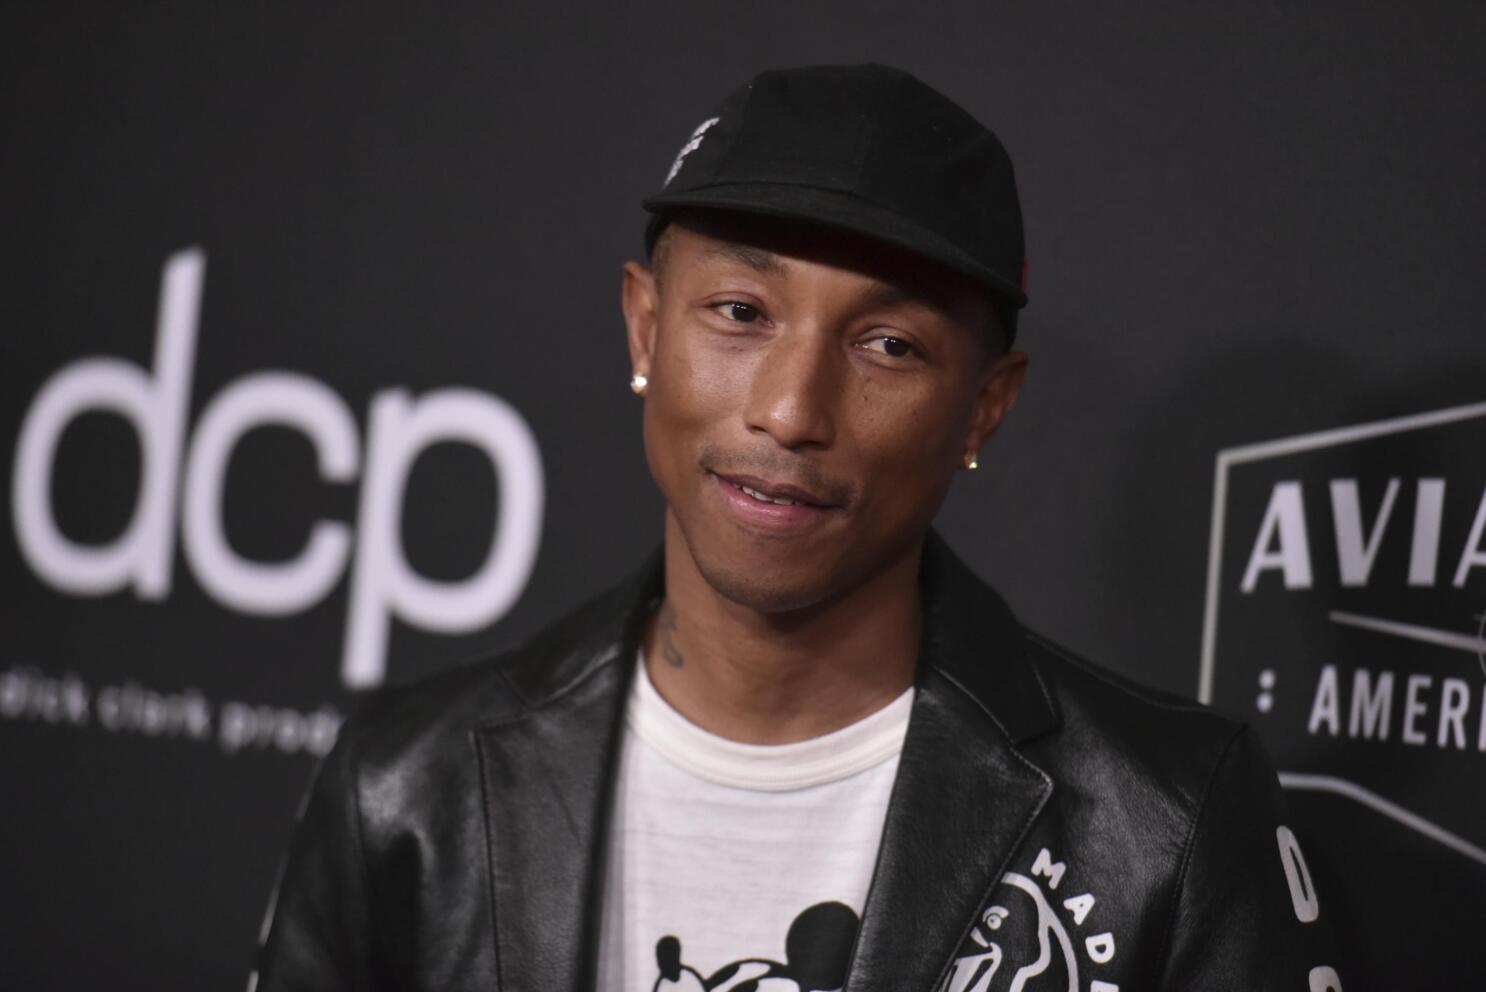 Pharrell Williams Is the New Men's Creative Director of Louis Vuitton